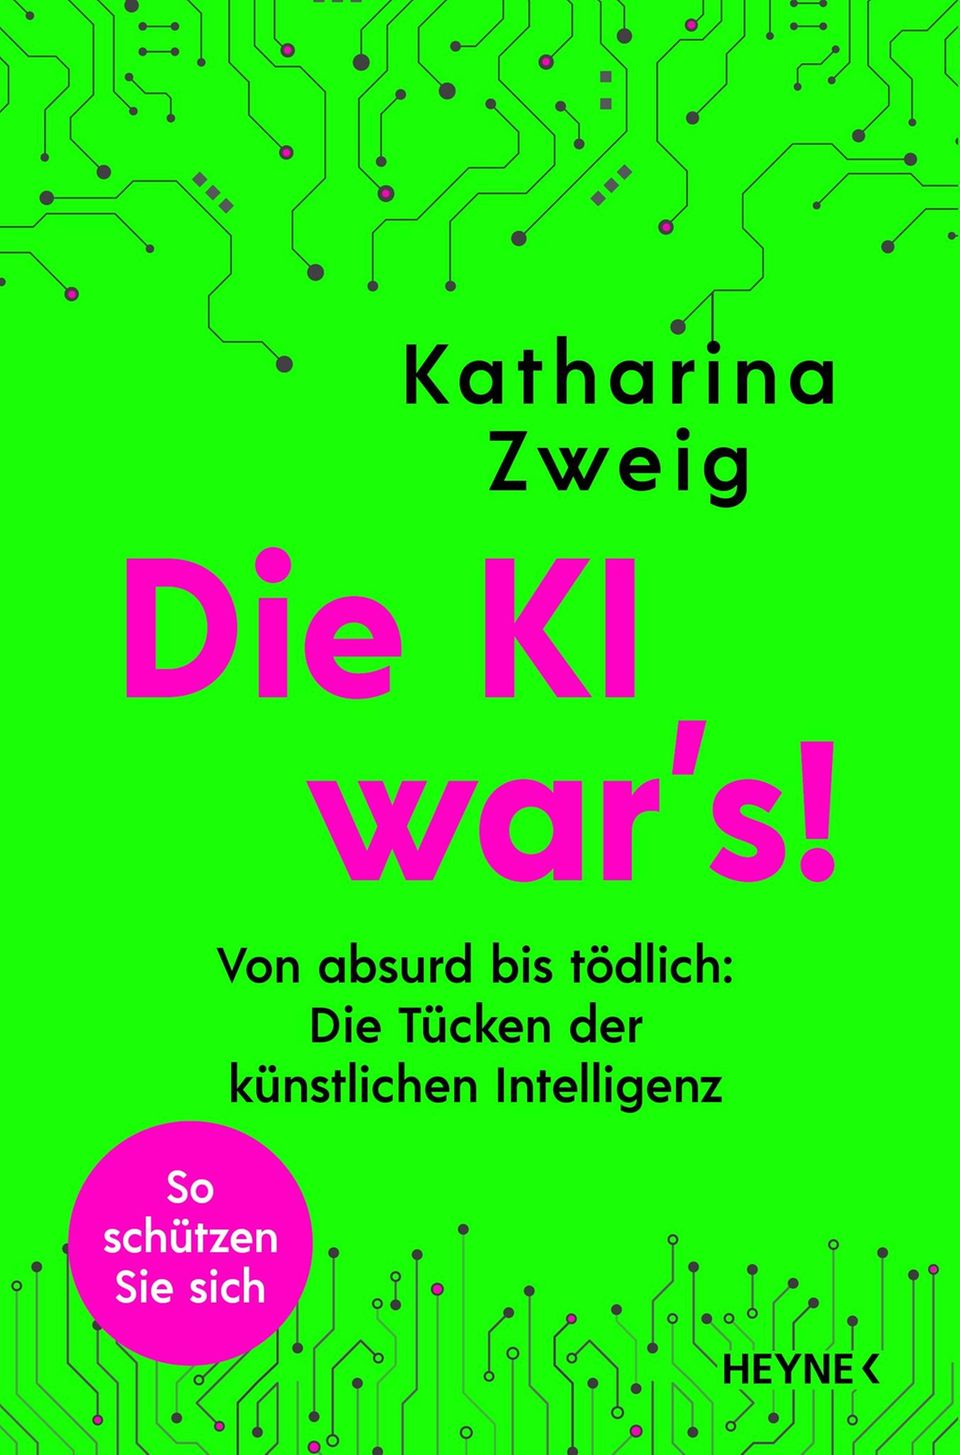 Book cover: "It was the AI" by Kaharina Zweig